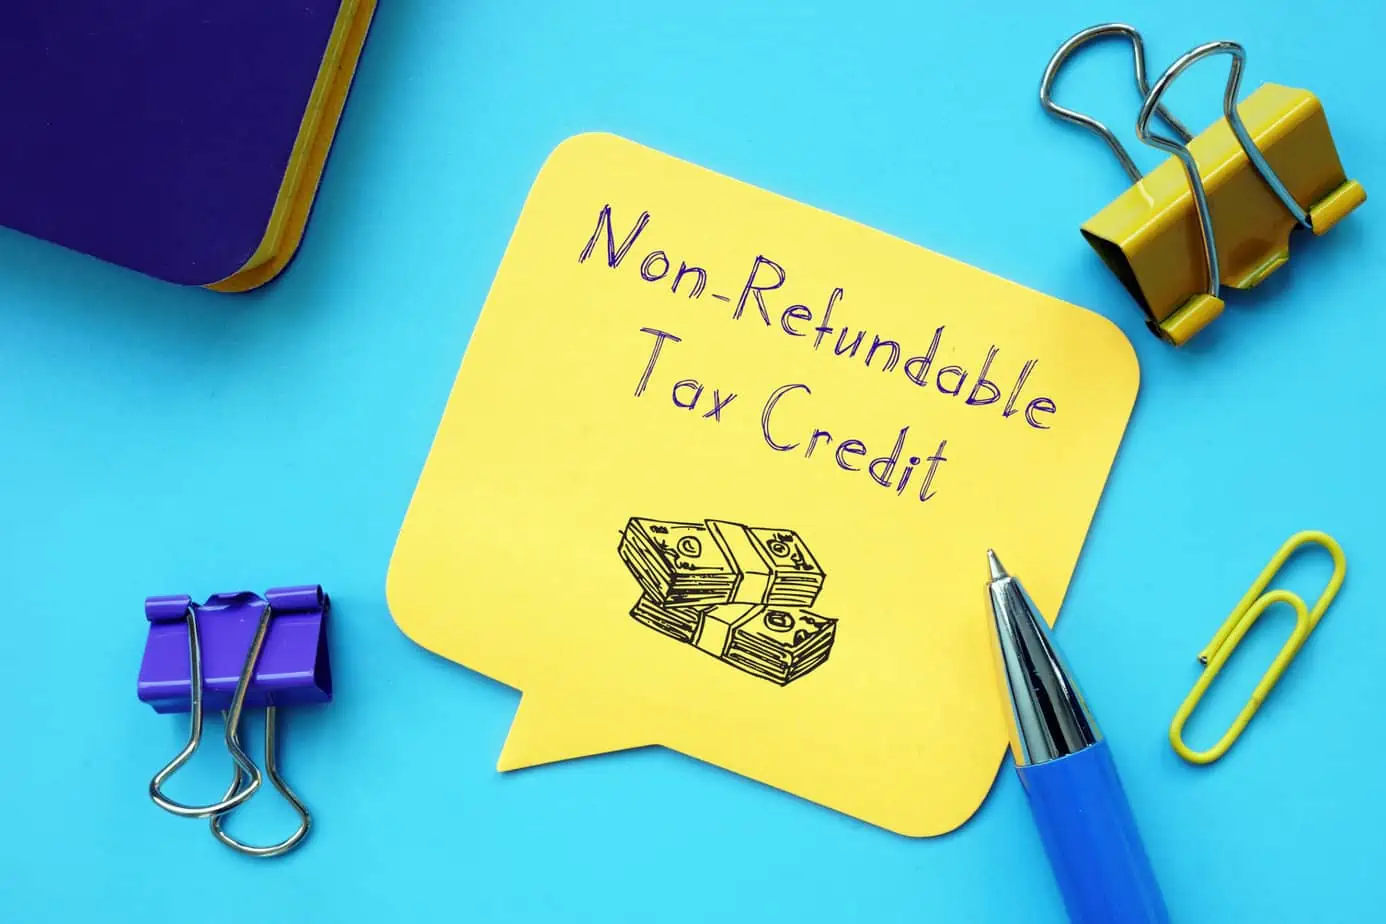 Non-refundable Part of Employee Retention Credit